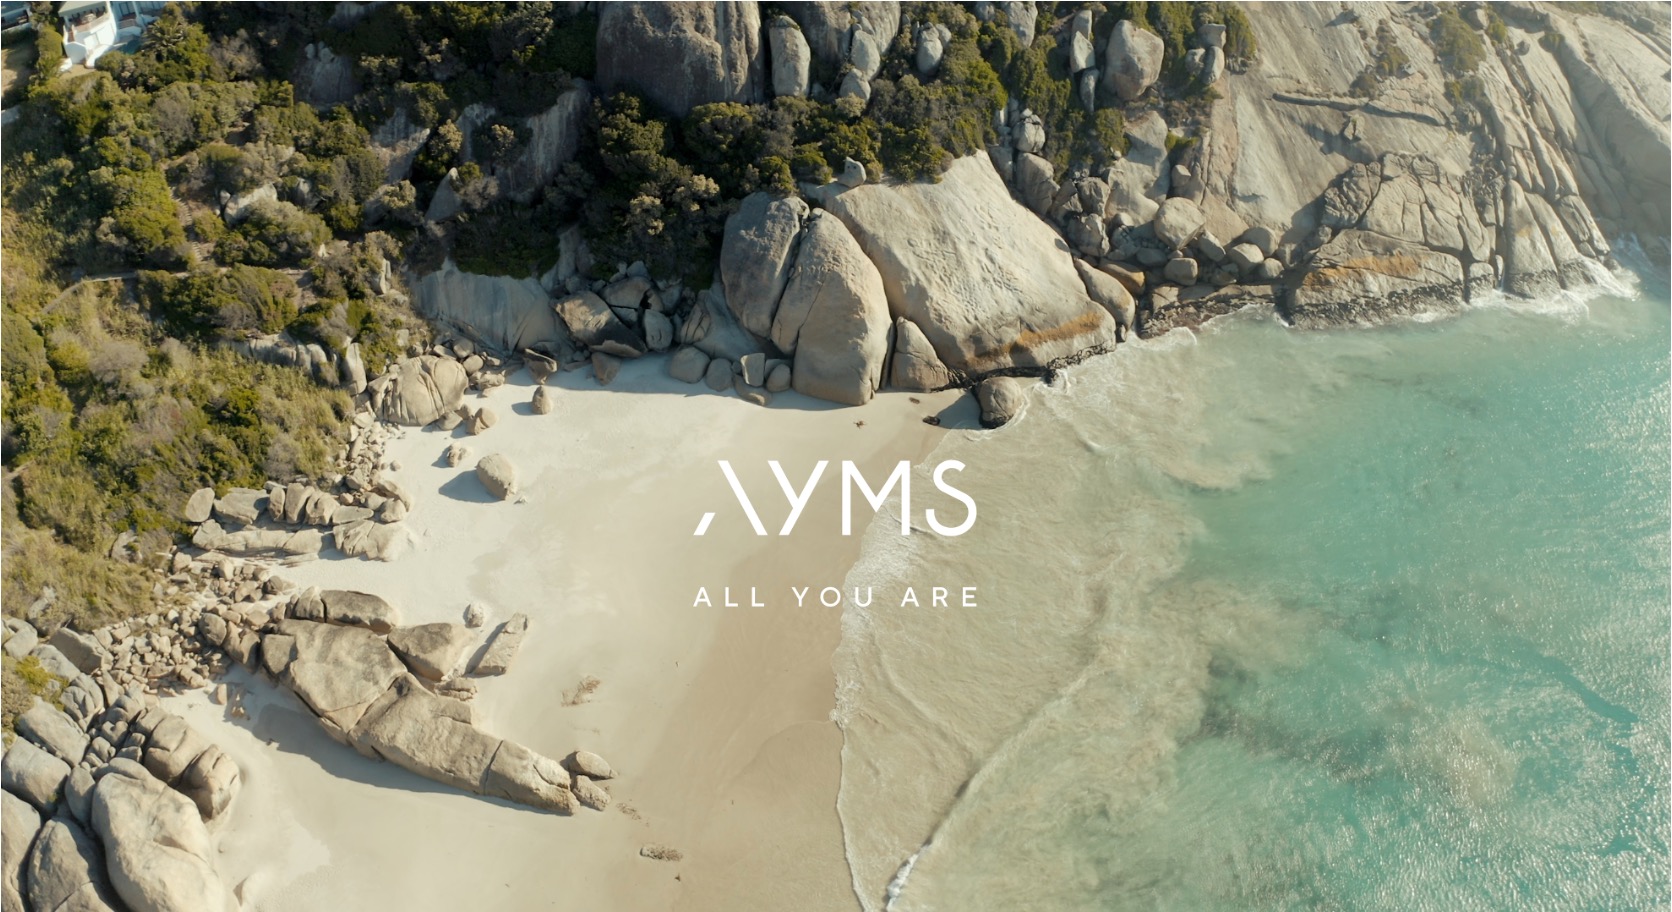 ayms all you are is a quite luxury lifestyle concept - fluid and in harmony to be authentic and genuine - to live out a life in full abundance - be ready for all you are